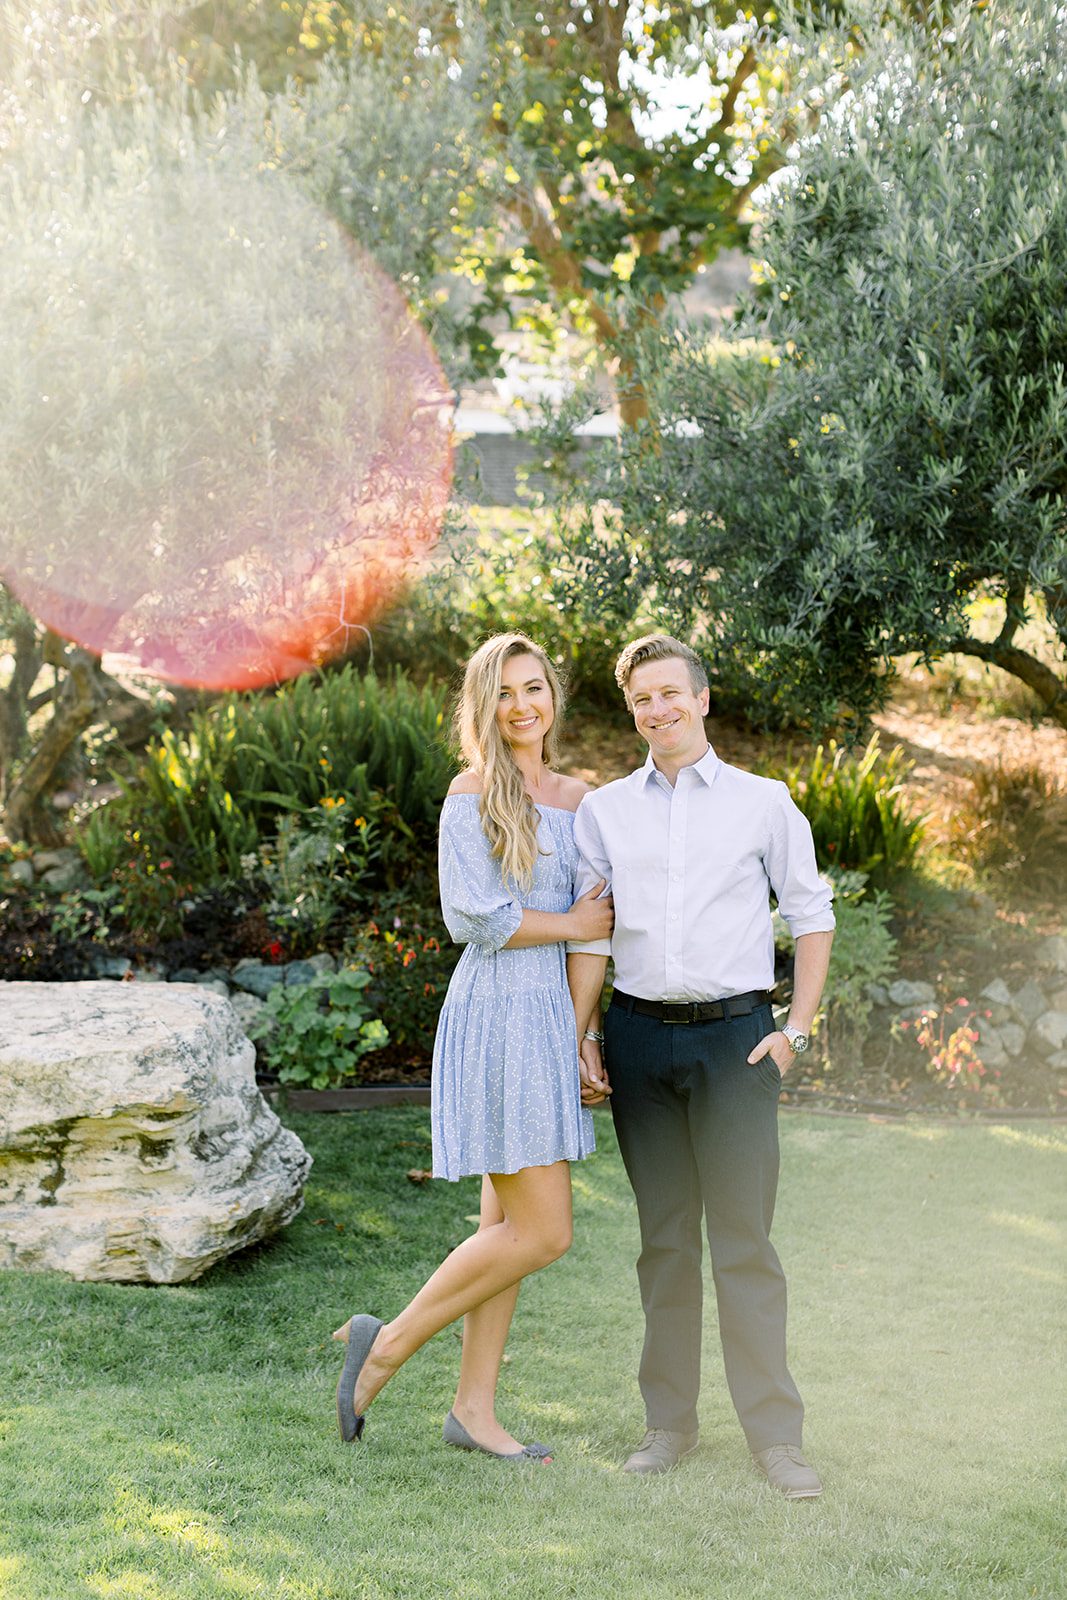 Secret Garden engagement session at the Madonna Inn with sunflares